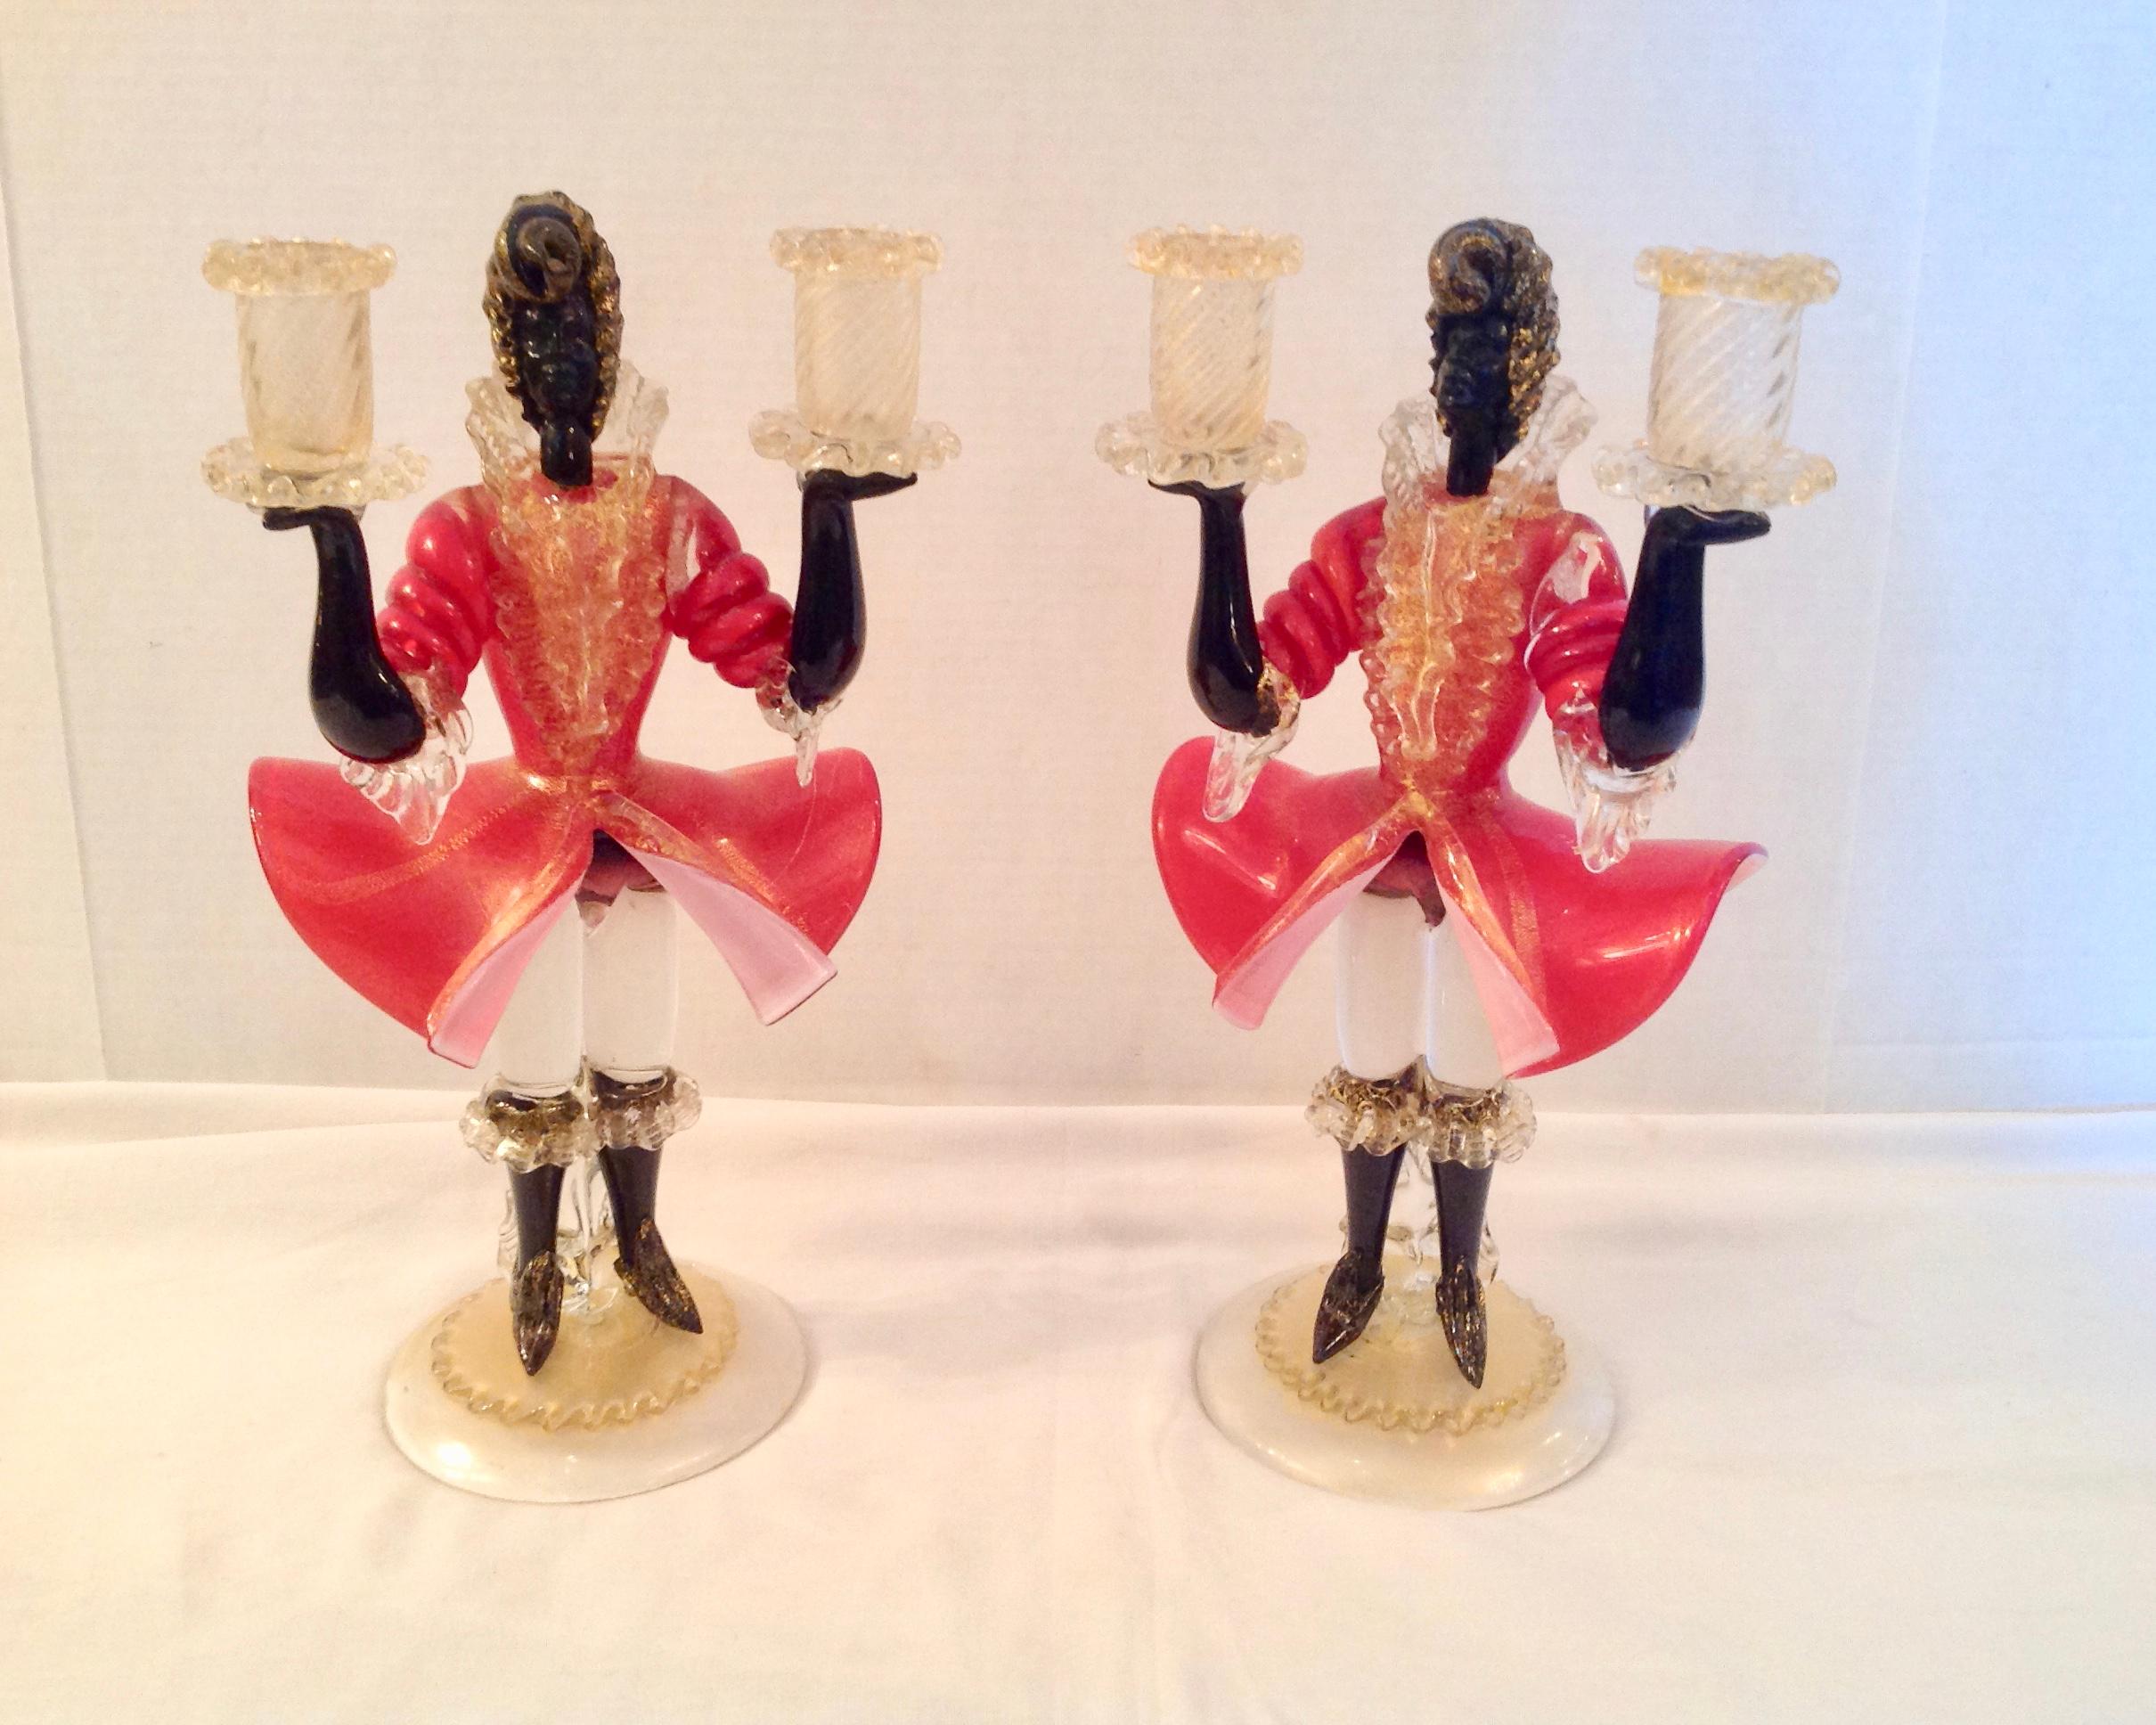 Elaborately garbed and finely fashioned blown glass in the Italian tradition.
Each holds candles in its outstretched arms. Dramatic details, color, and scale.
The figures are dressed in 